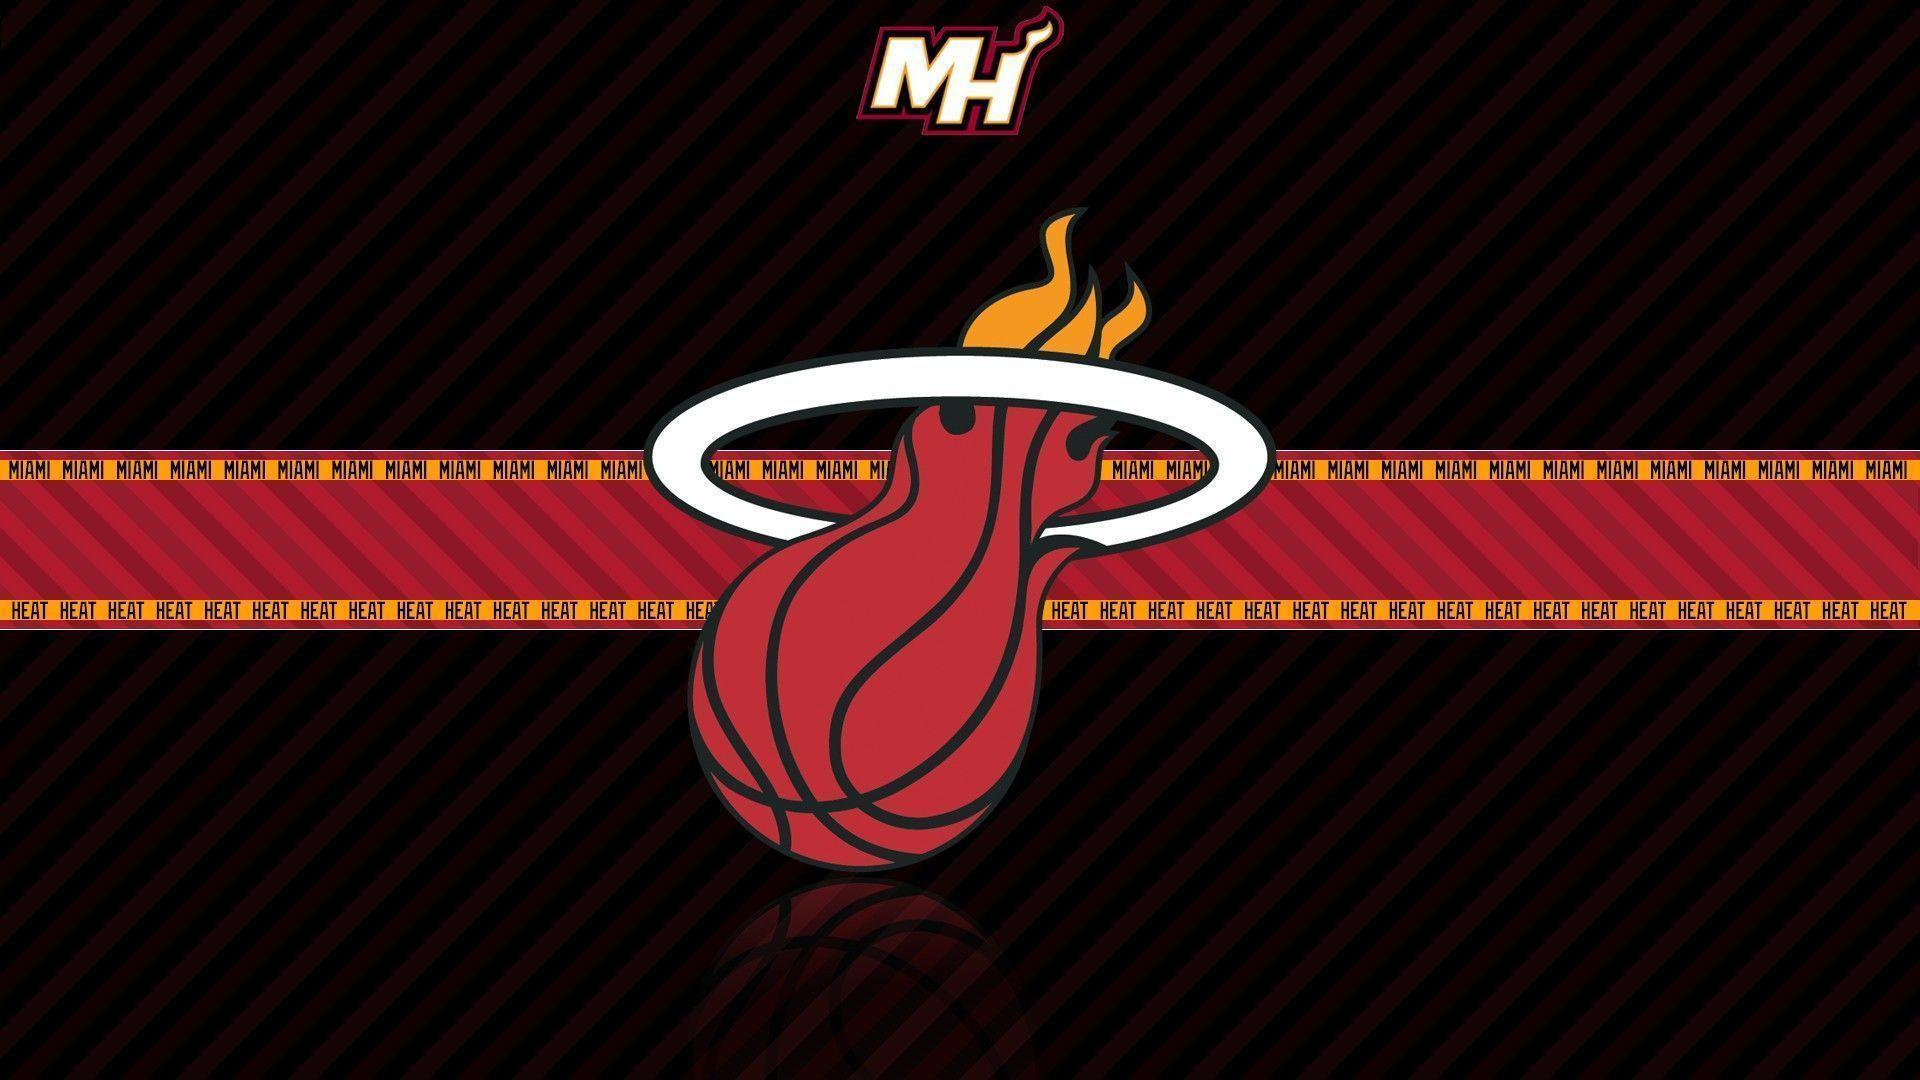 miami heat logo wallpapers – 1920×1080 High Definition Wallpapers